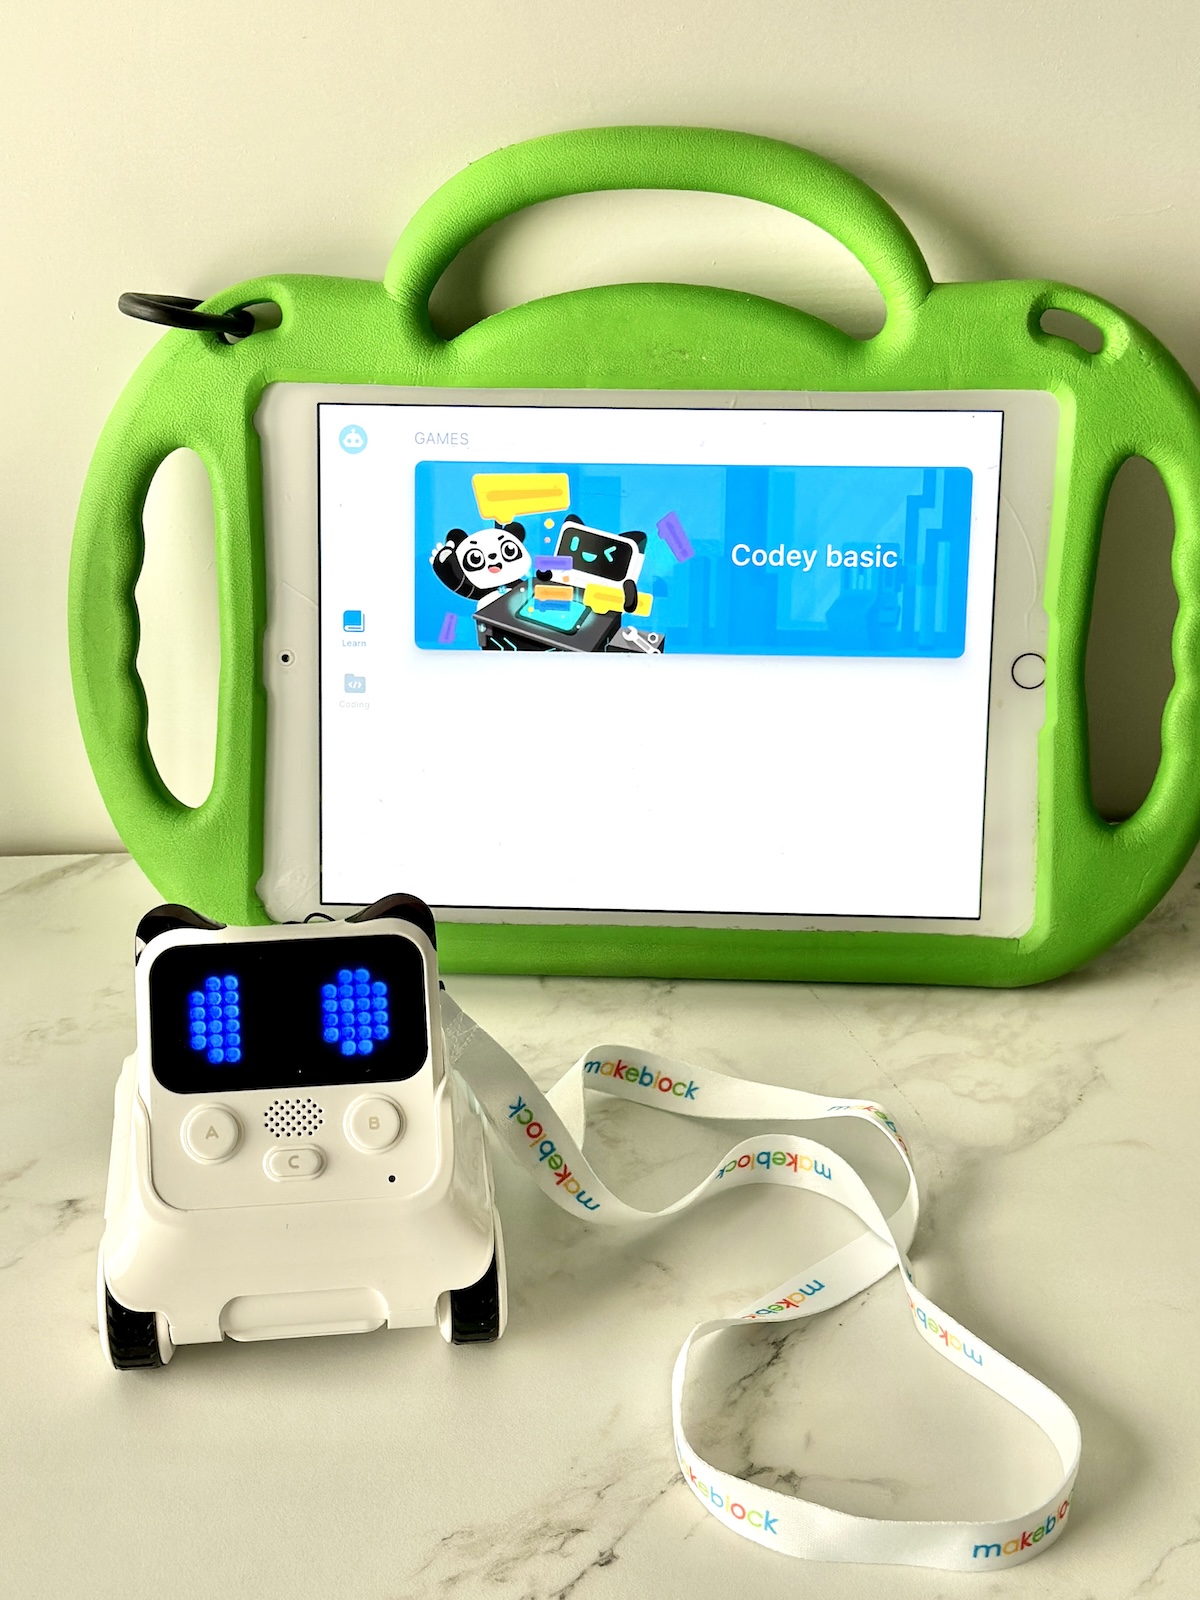 The interactive Codey rocky robot toy and the Makeblock app.